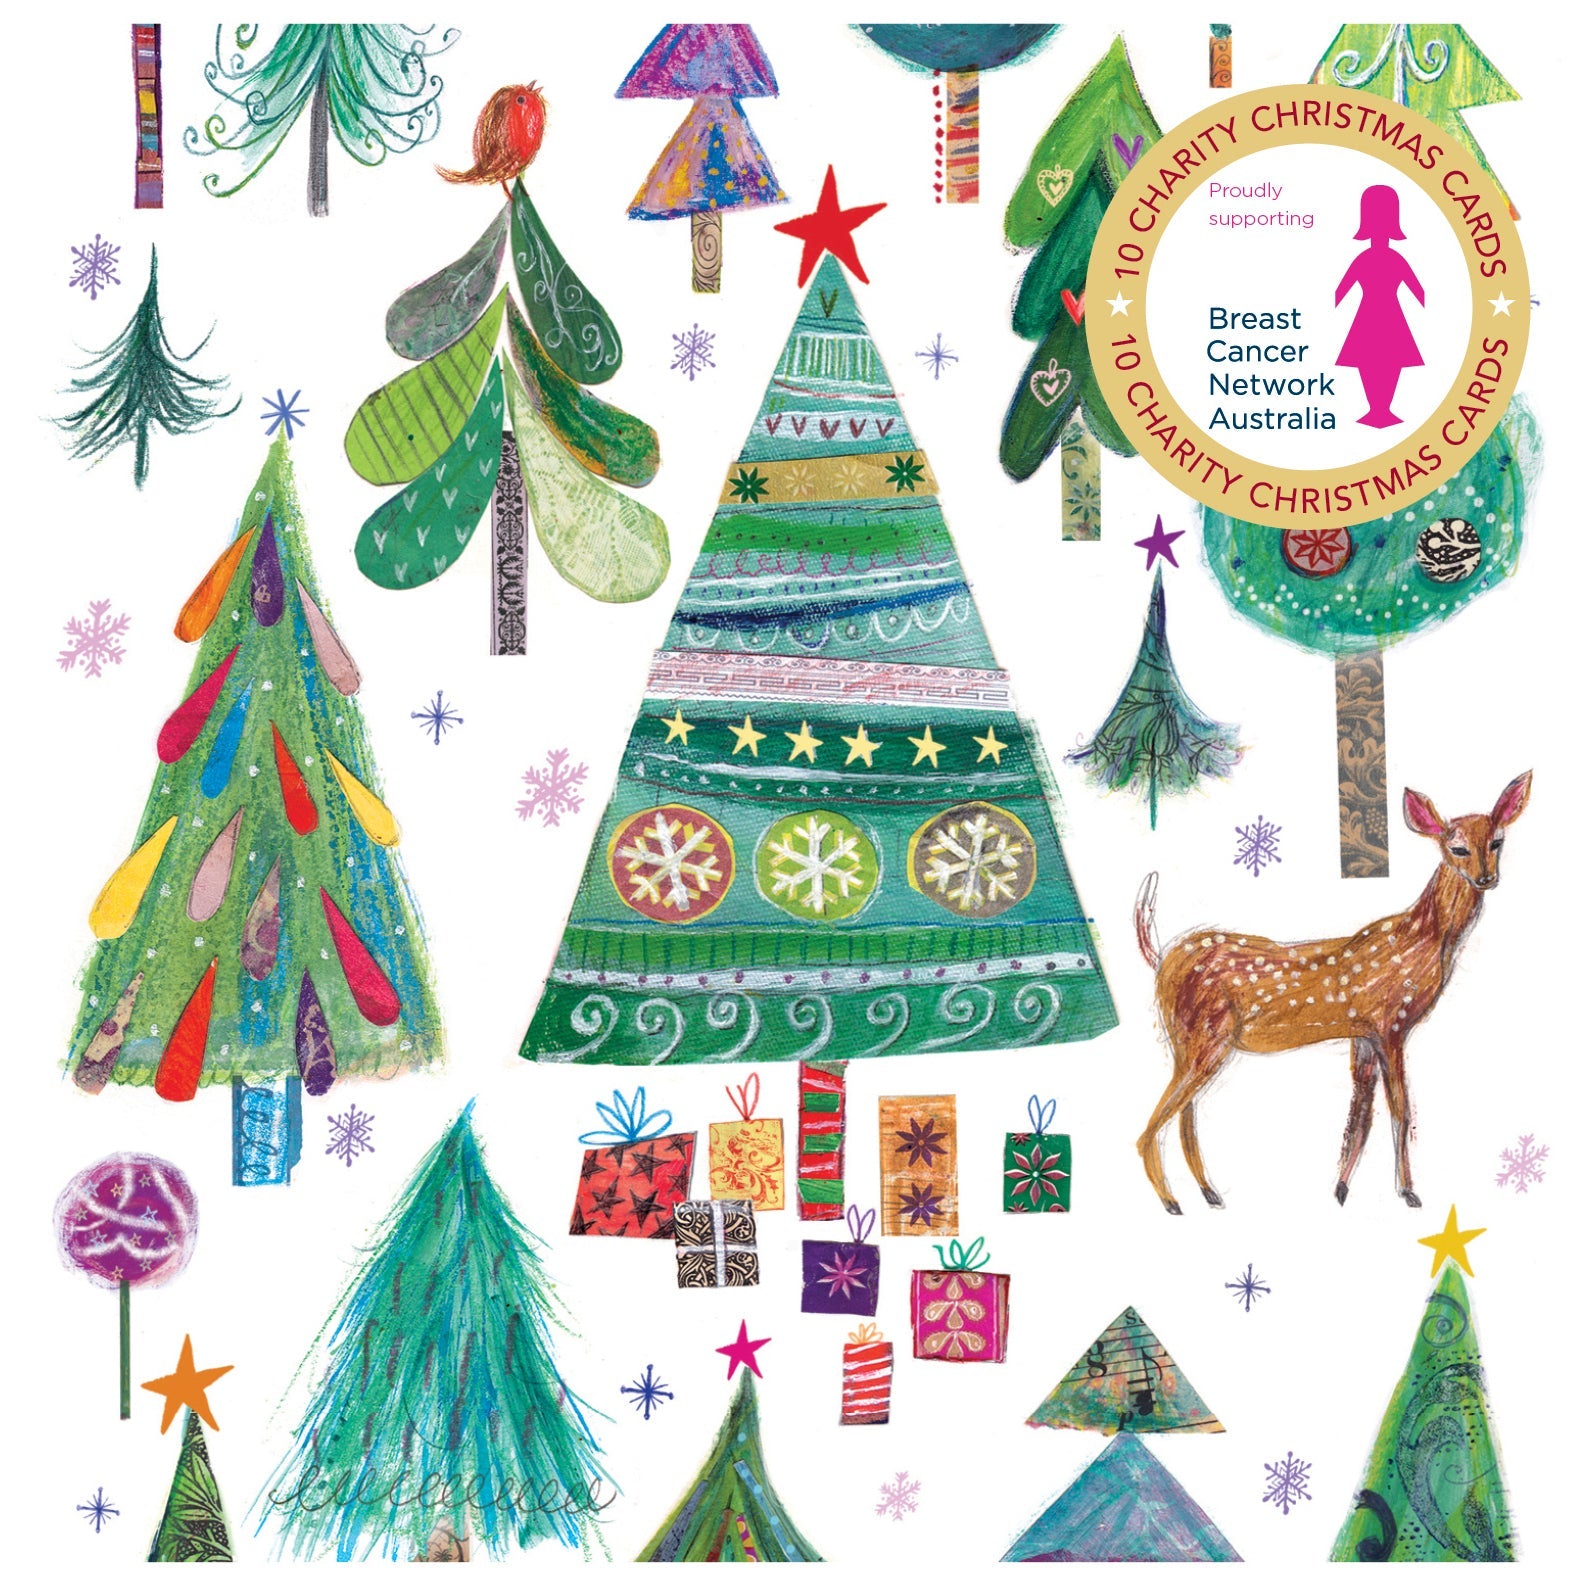 BCNA Christmas Trees - 10 Charity Christmas Cards Pack